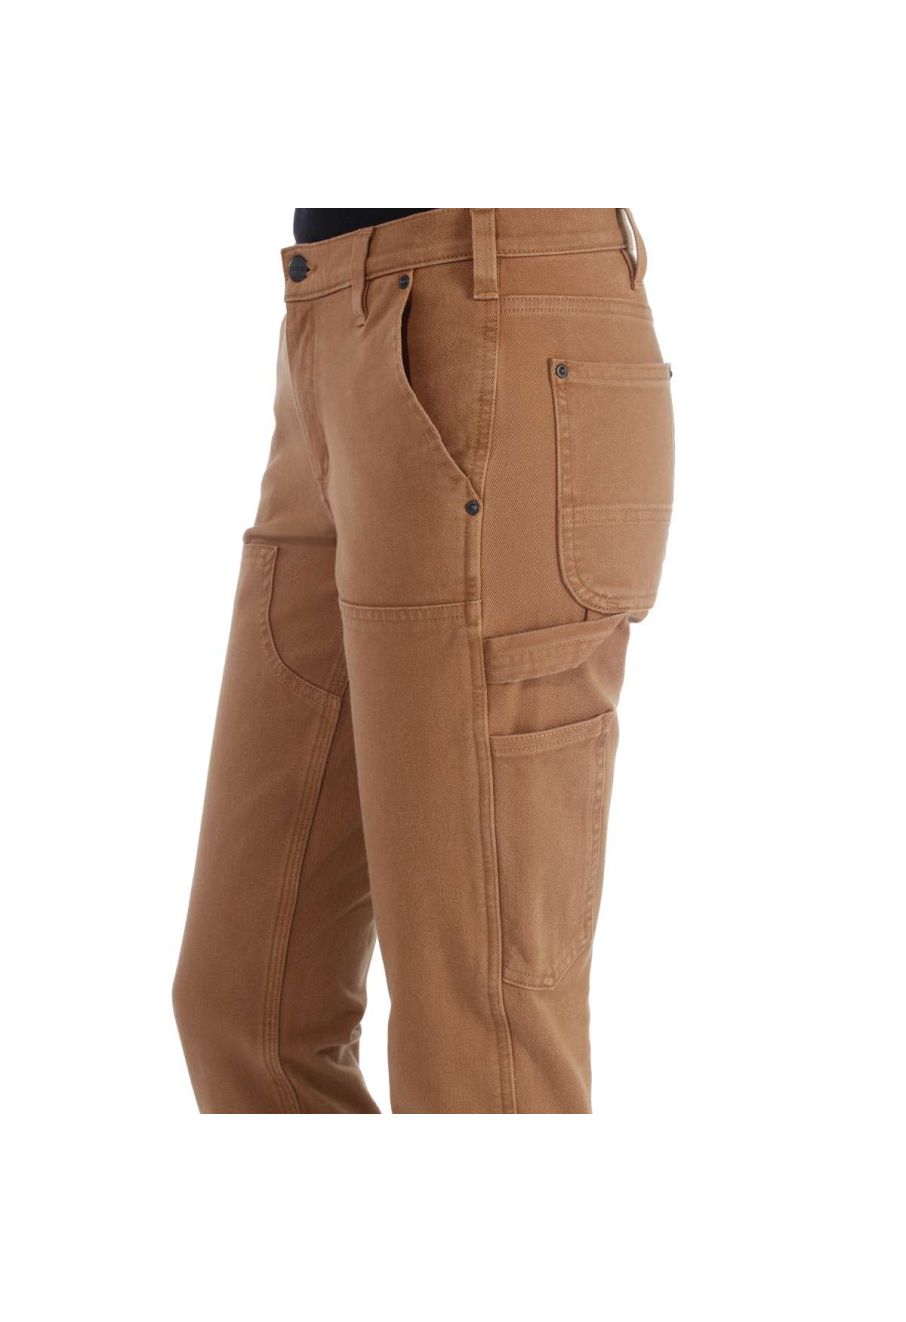 Carhartt 104296 Women's Stretch Twill Double Front Trousers - C. Brown